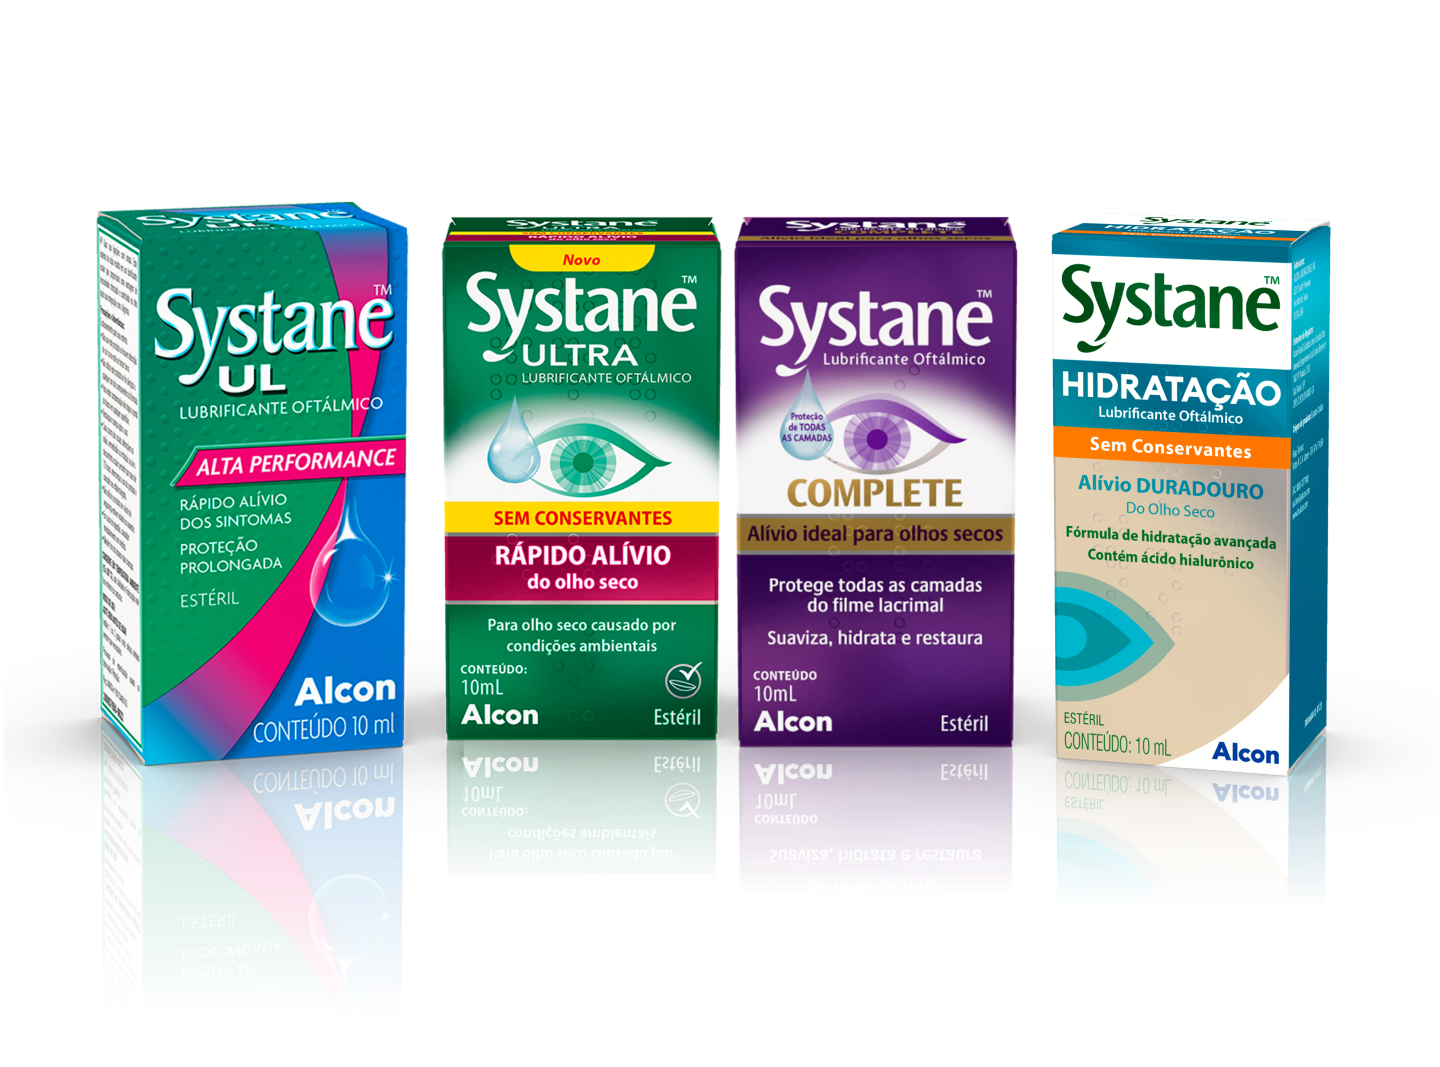 Systane preservative free products